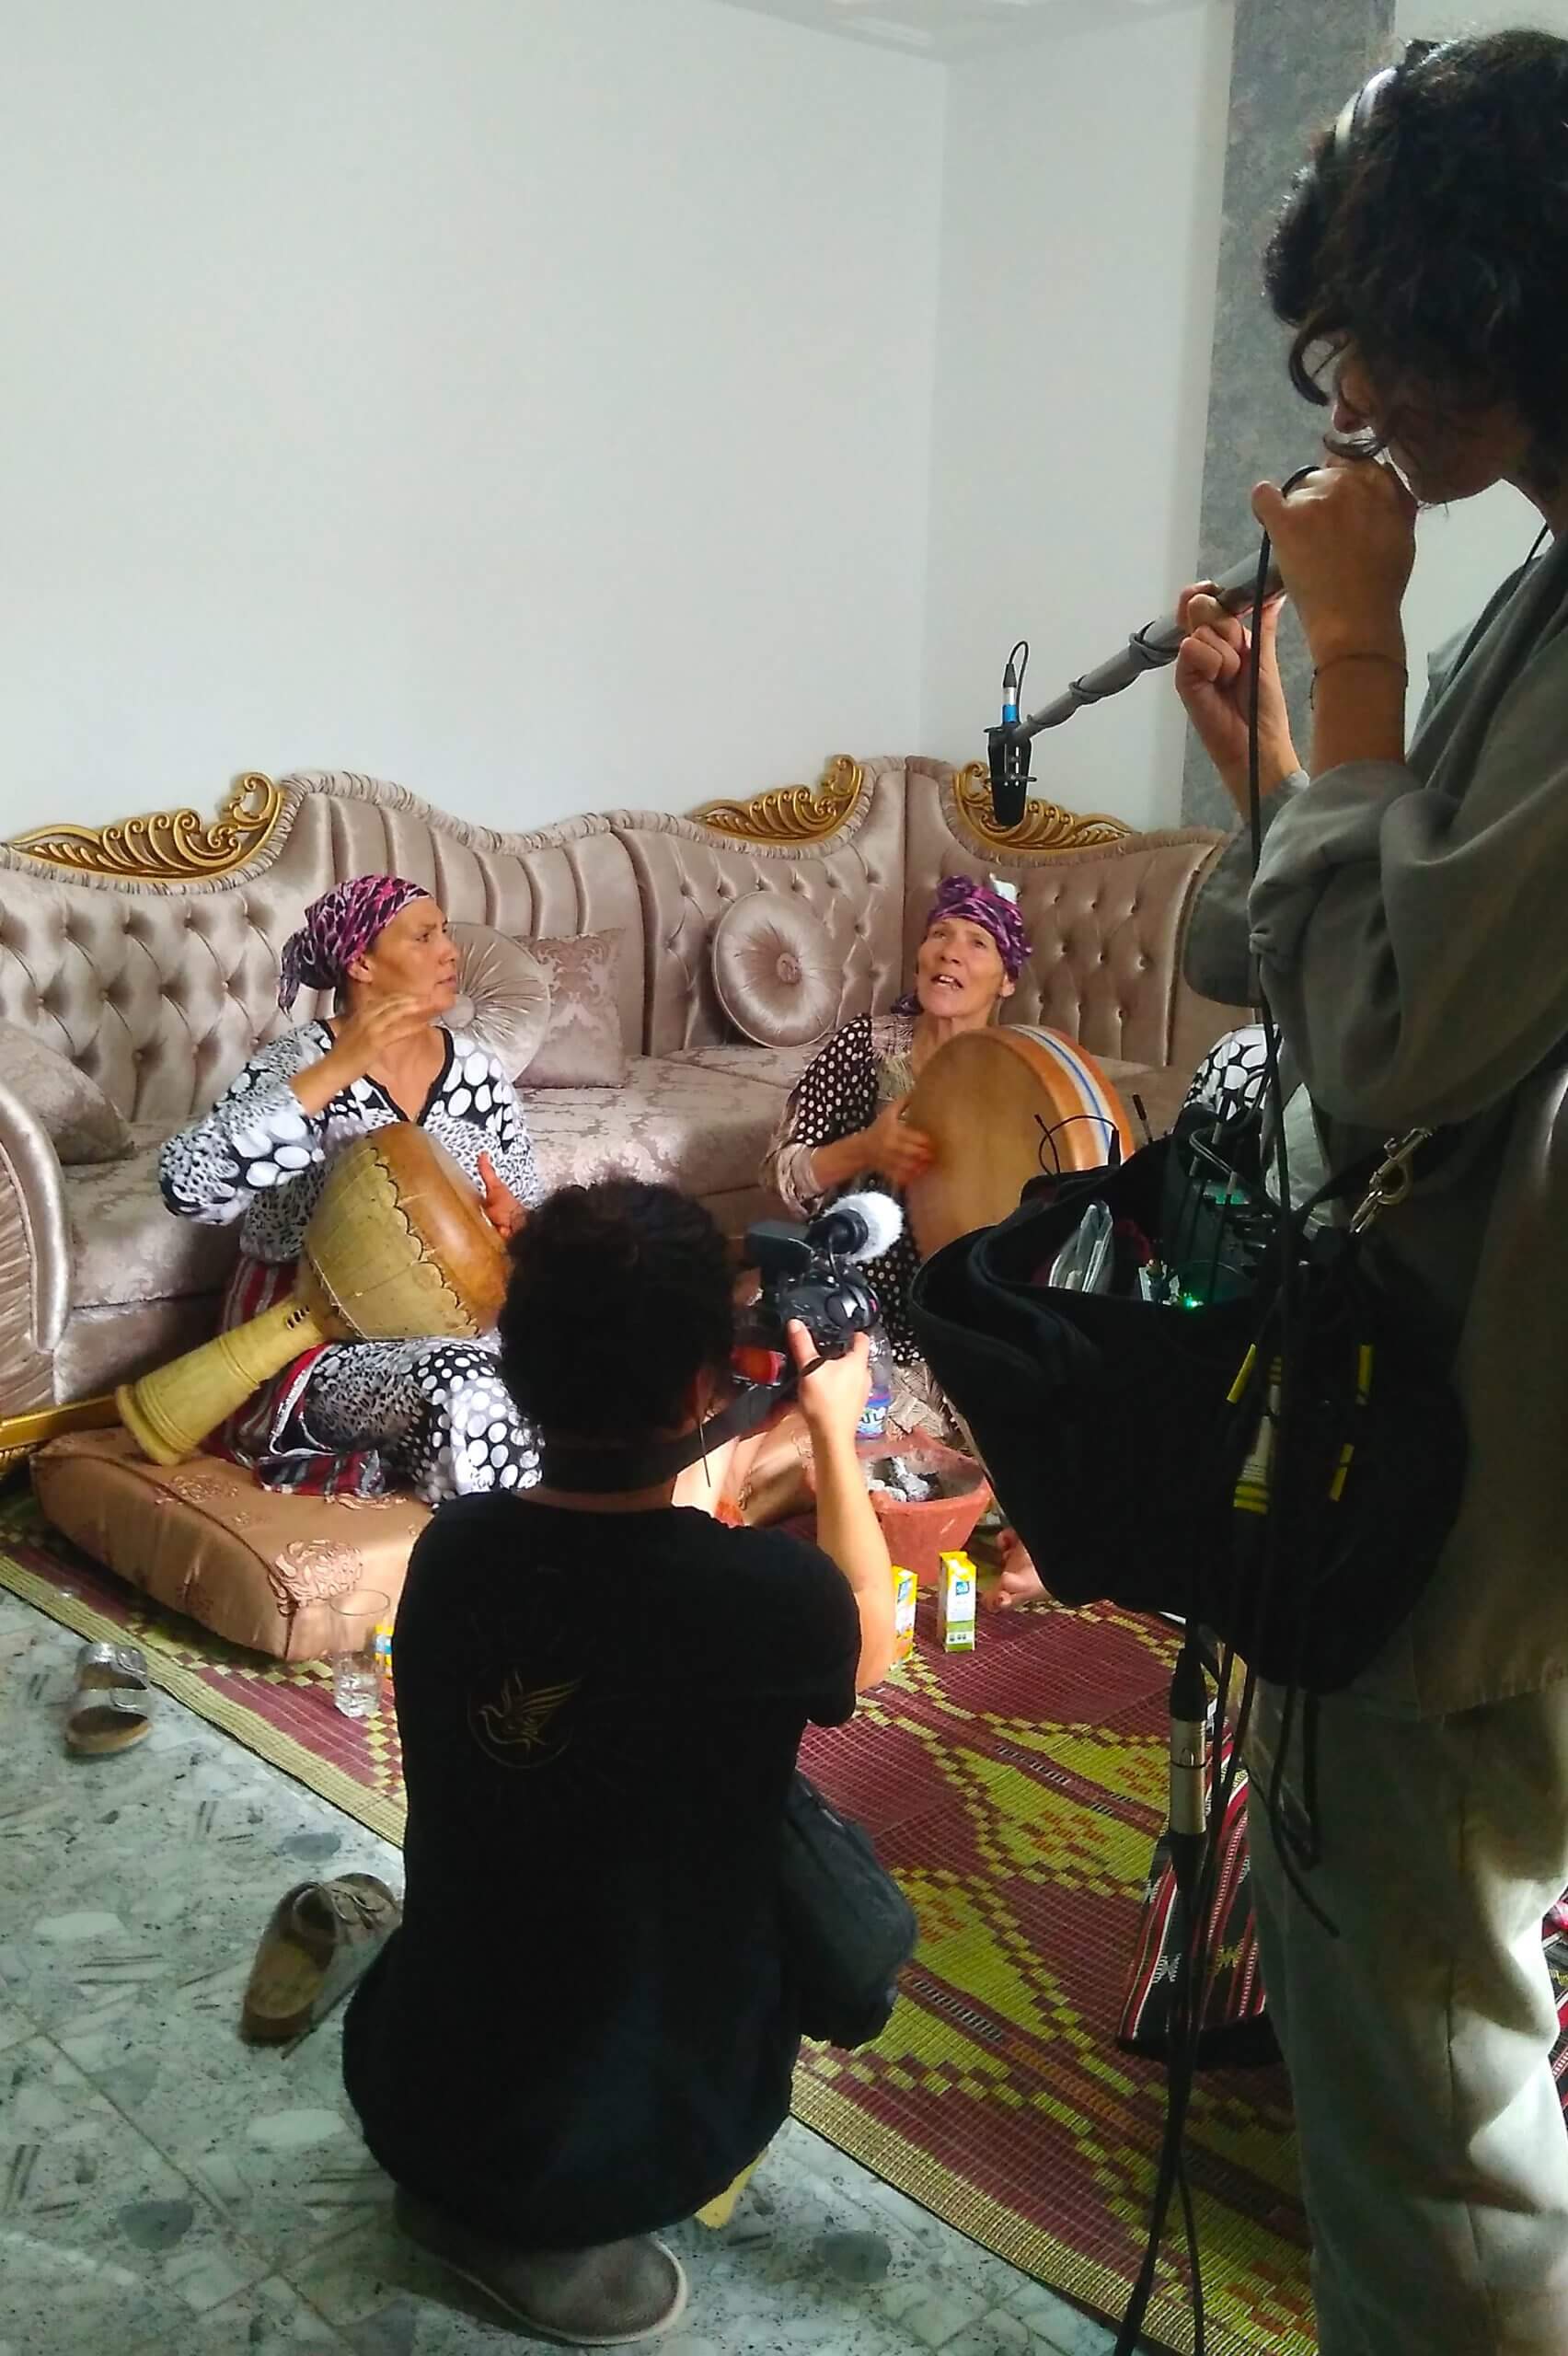 Production still from Machtat. Two film crew members, one with a camera and one with a boom mic stand in front of two women in headwraps. They are sitting on a coushion on the floor in front of a couch playing drums and singing.